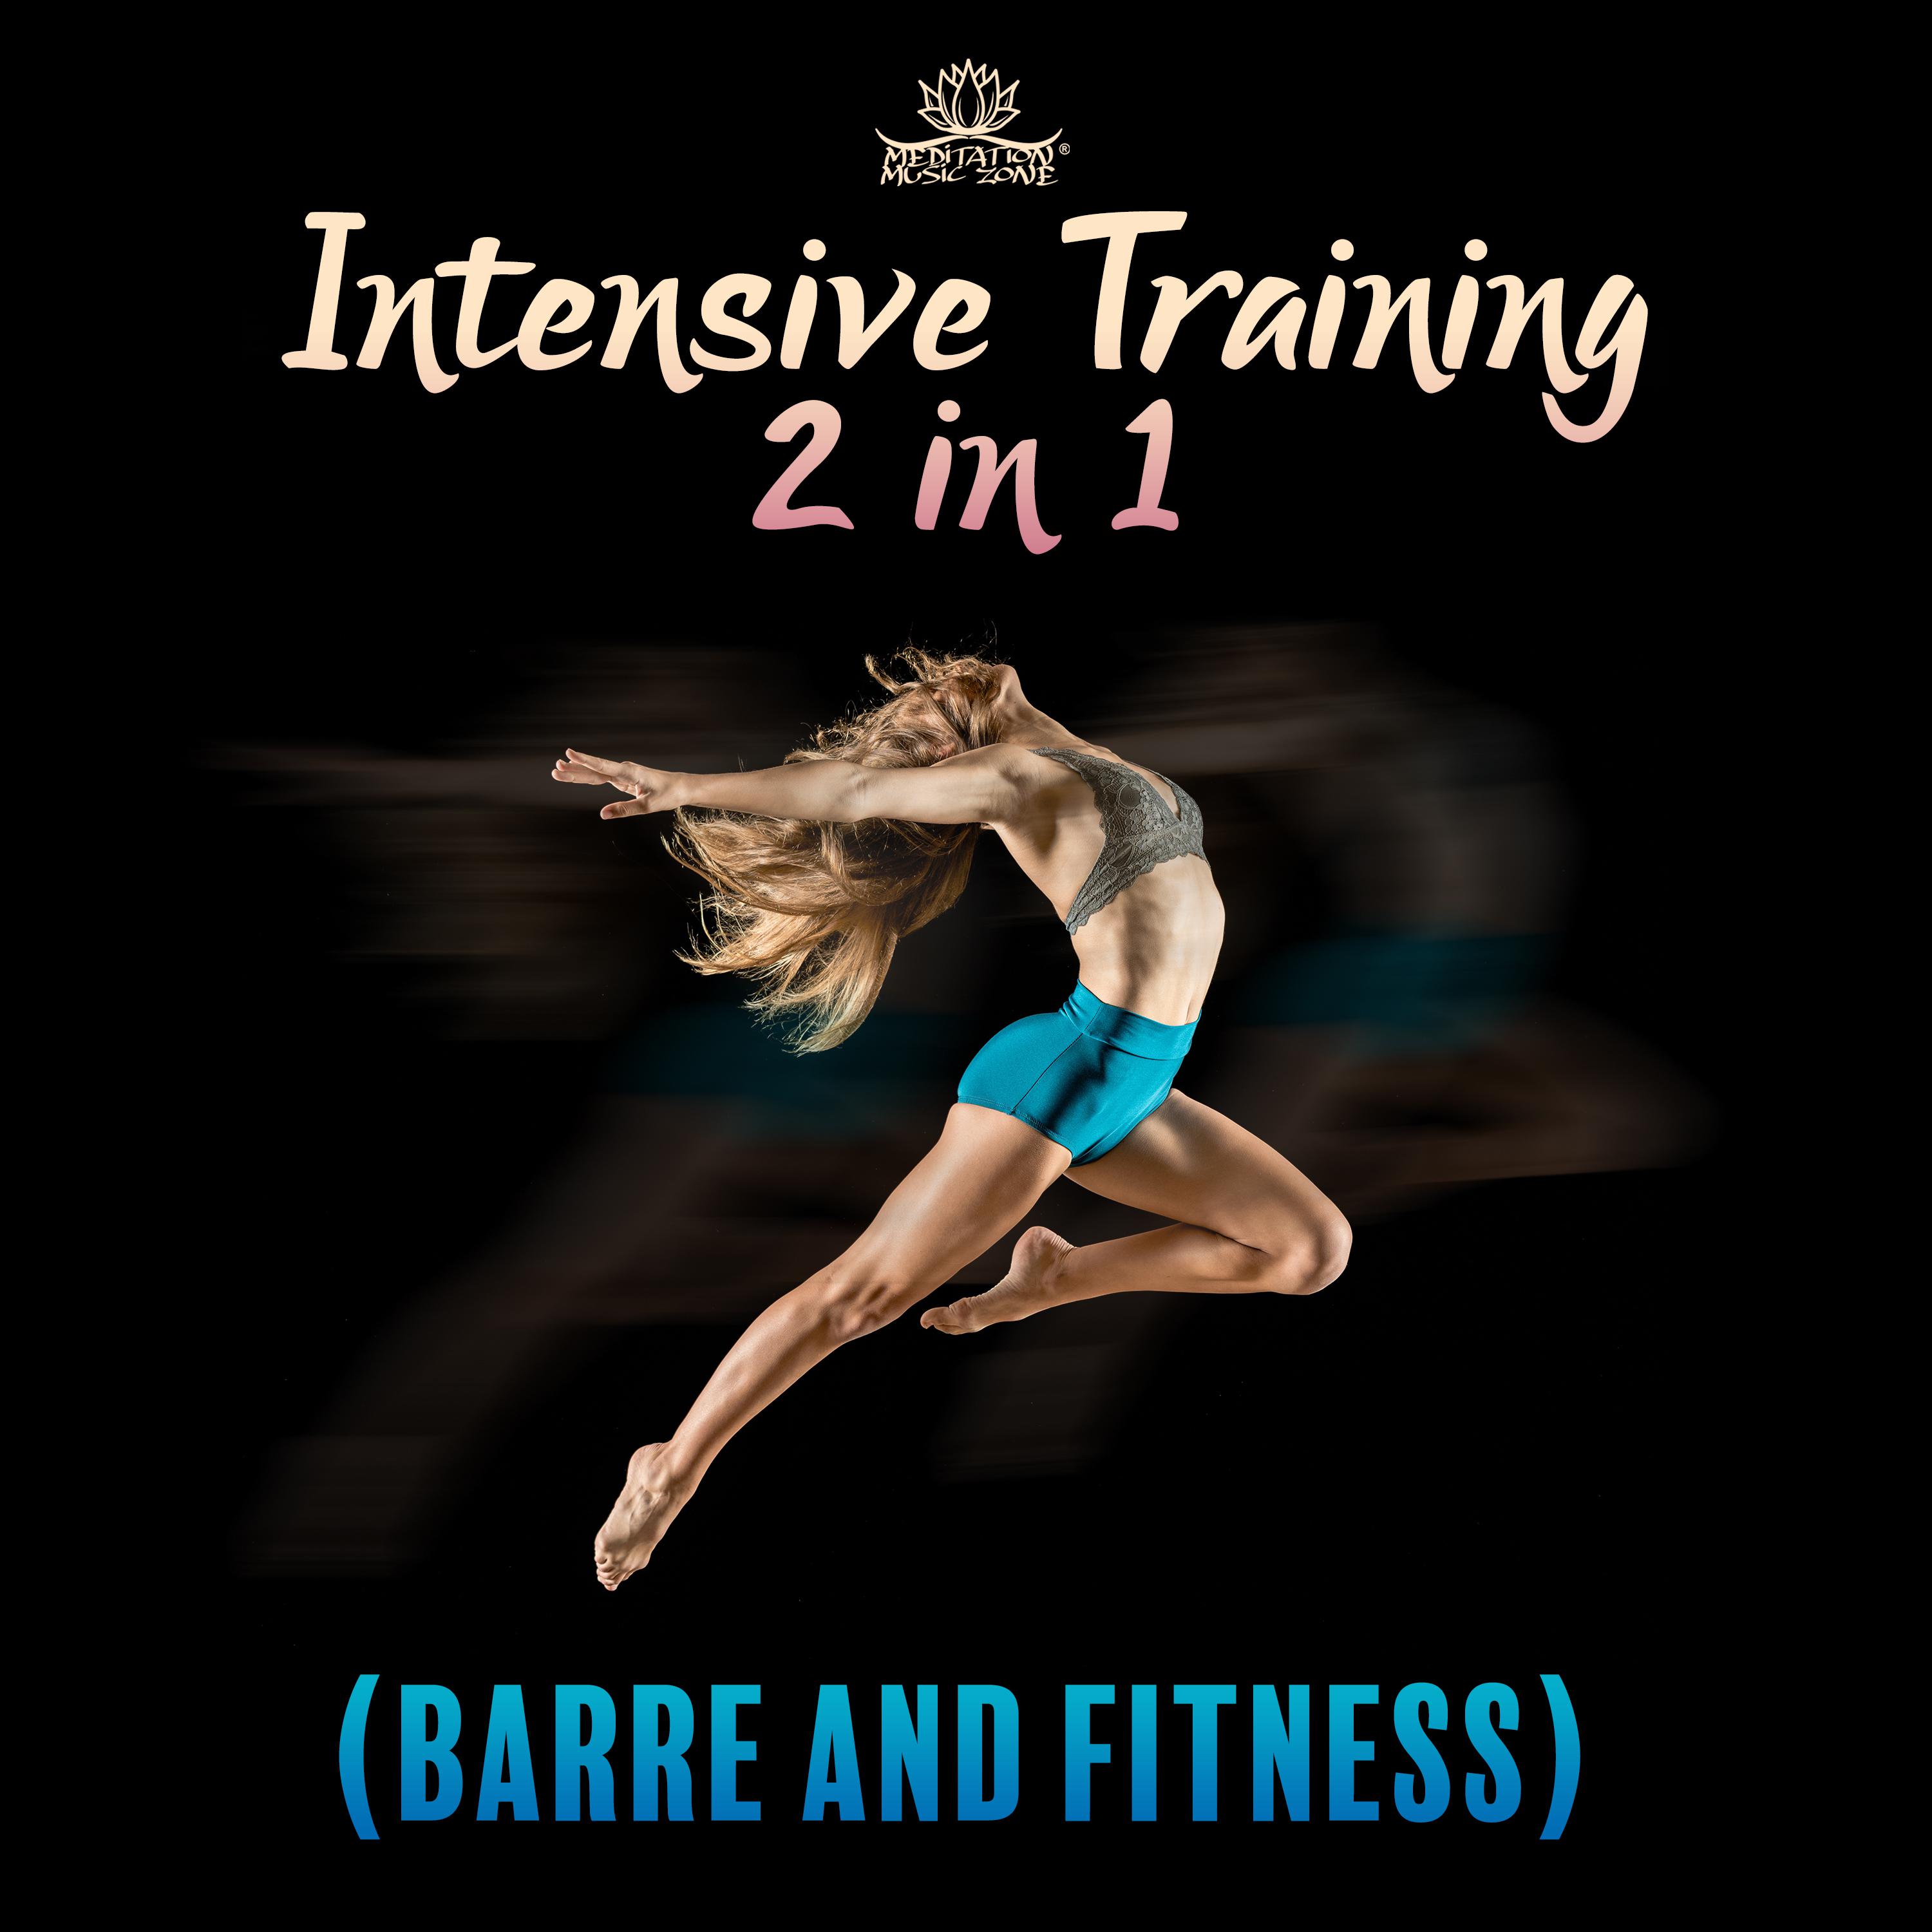 Intensive Training 2 in 1